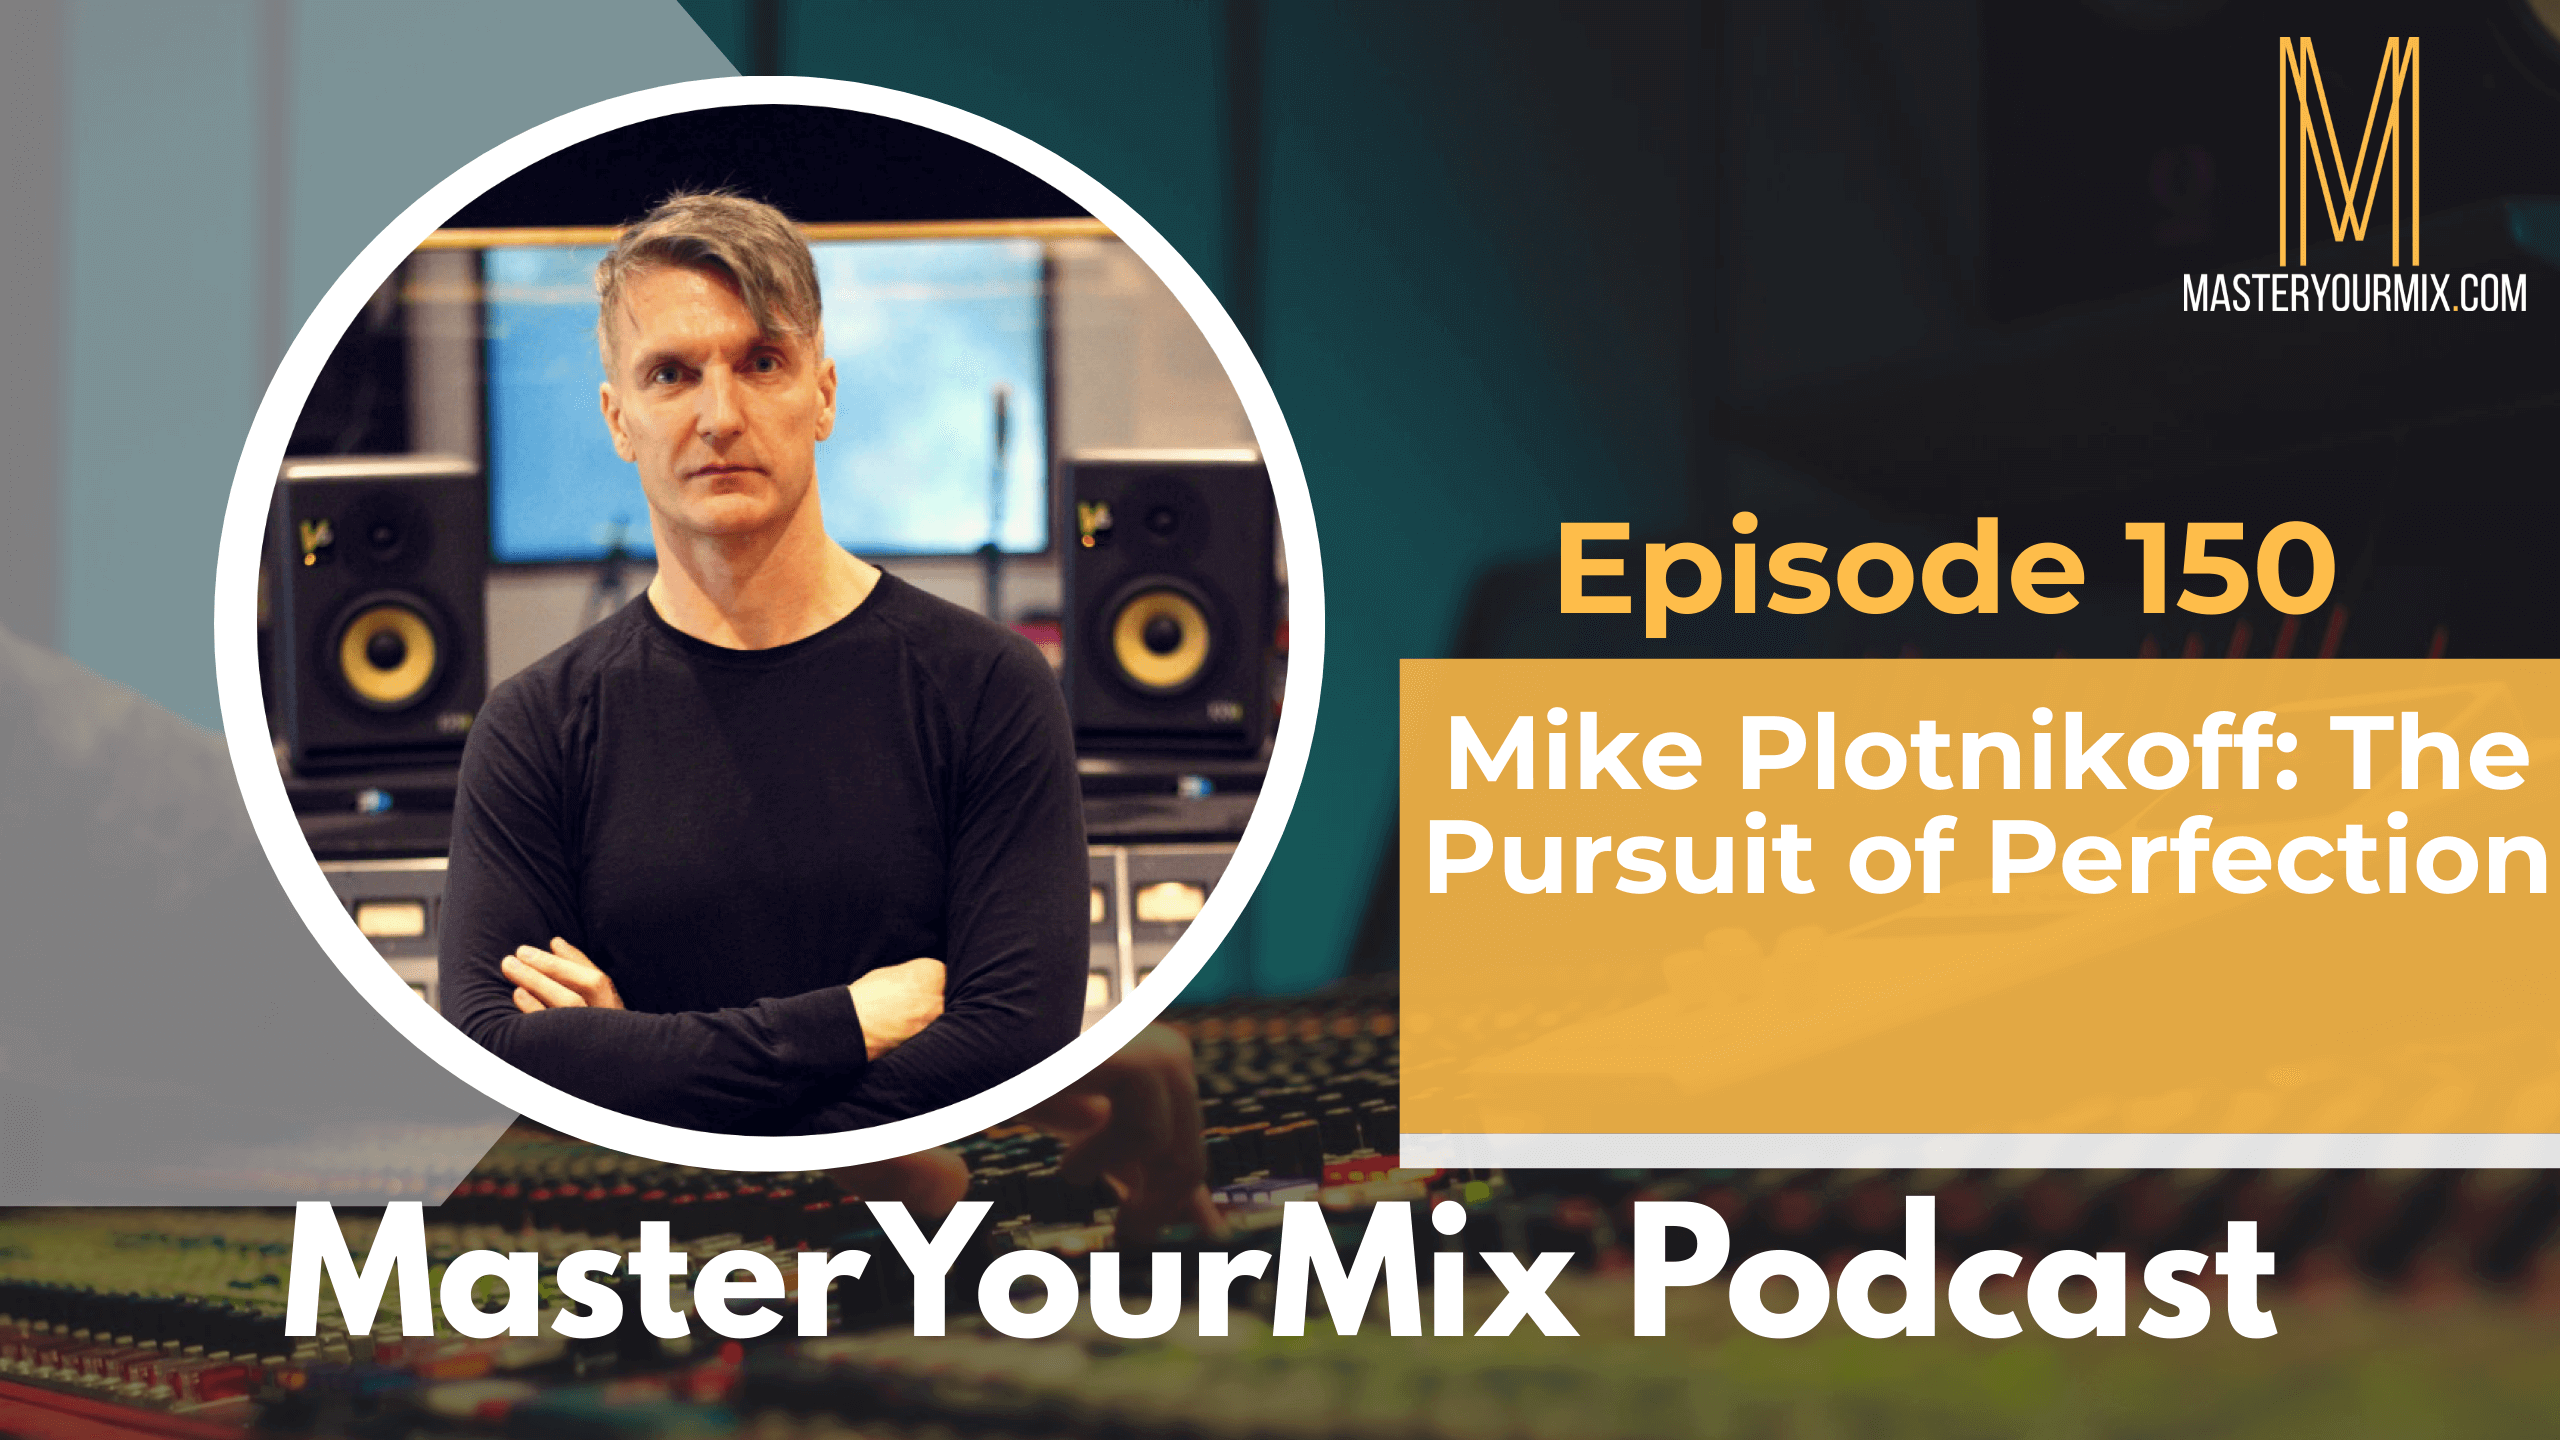 master your mix podcast, ep 150 mike plotnikoff